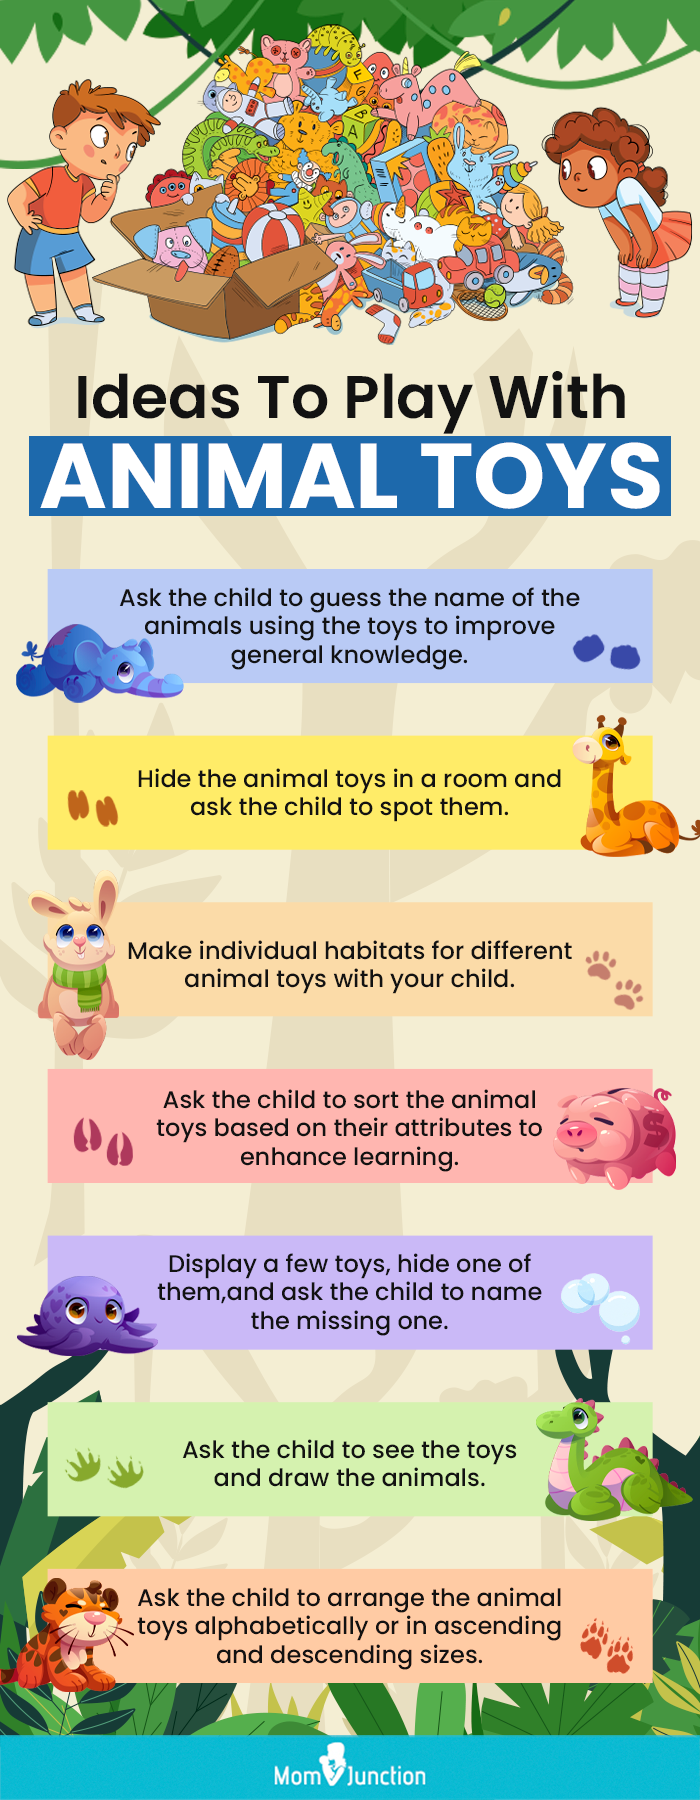 Ideas To Play With ANIMAL TOYS